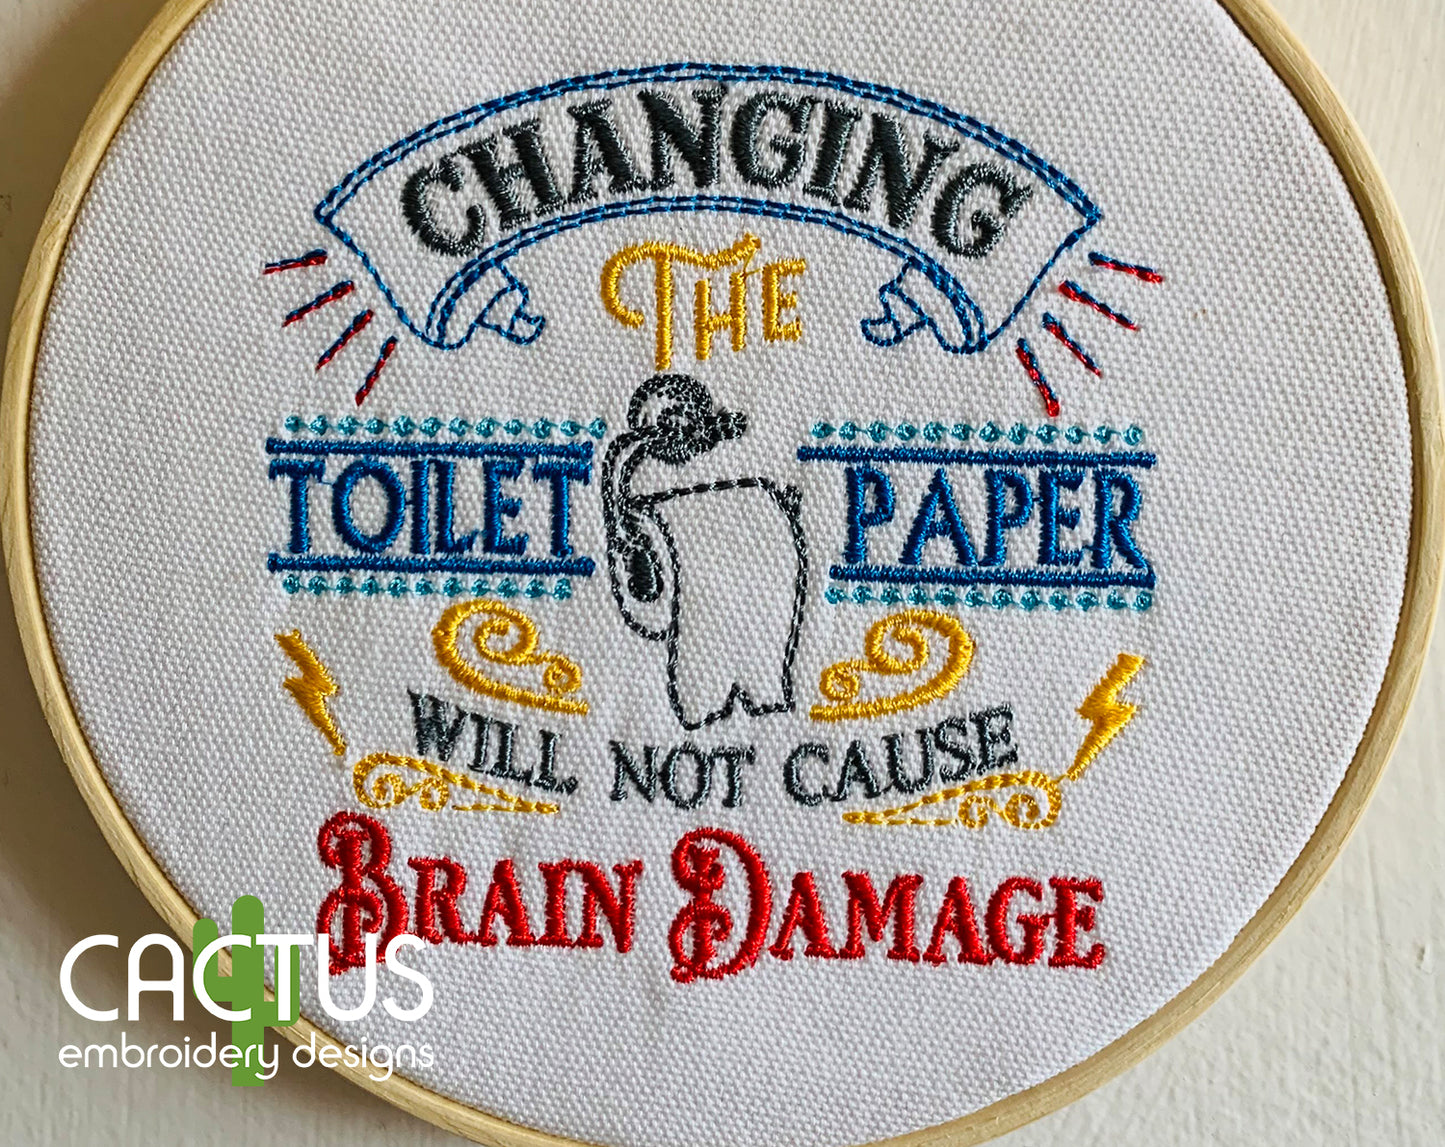 Changing the Toilet Paper Embroidery Design